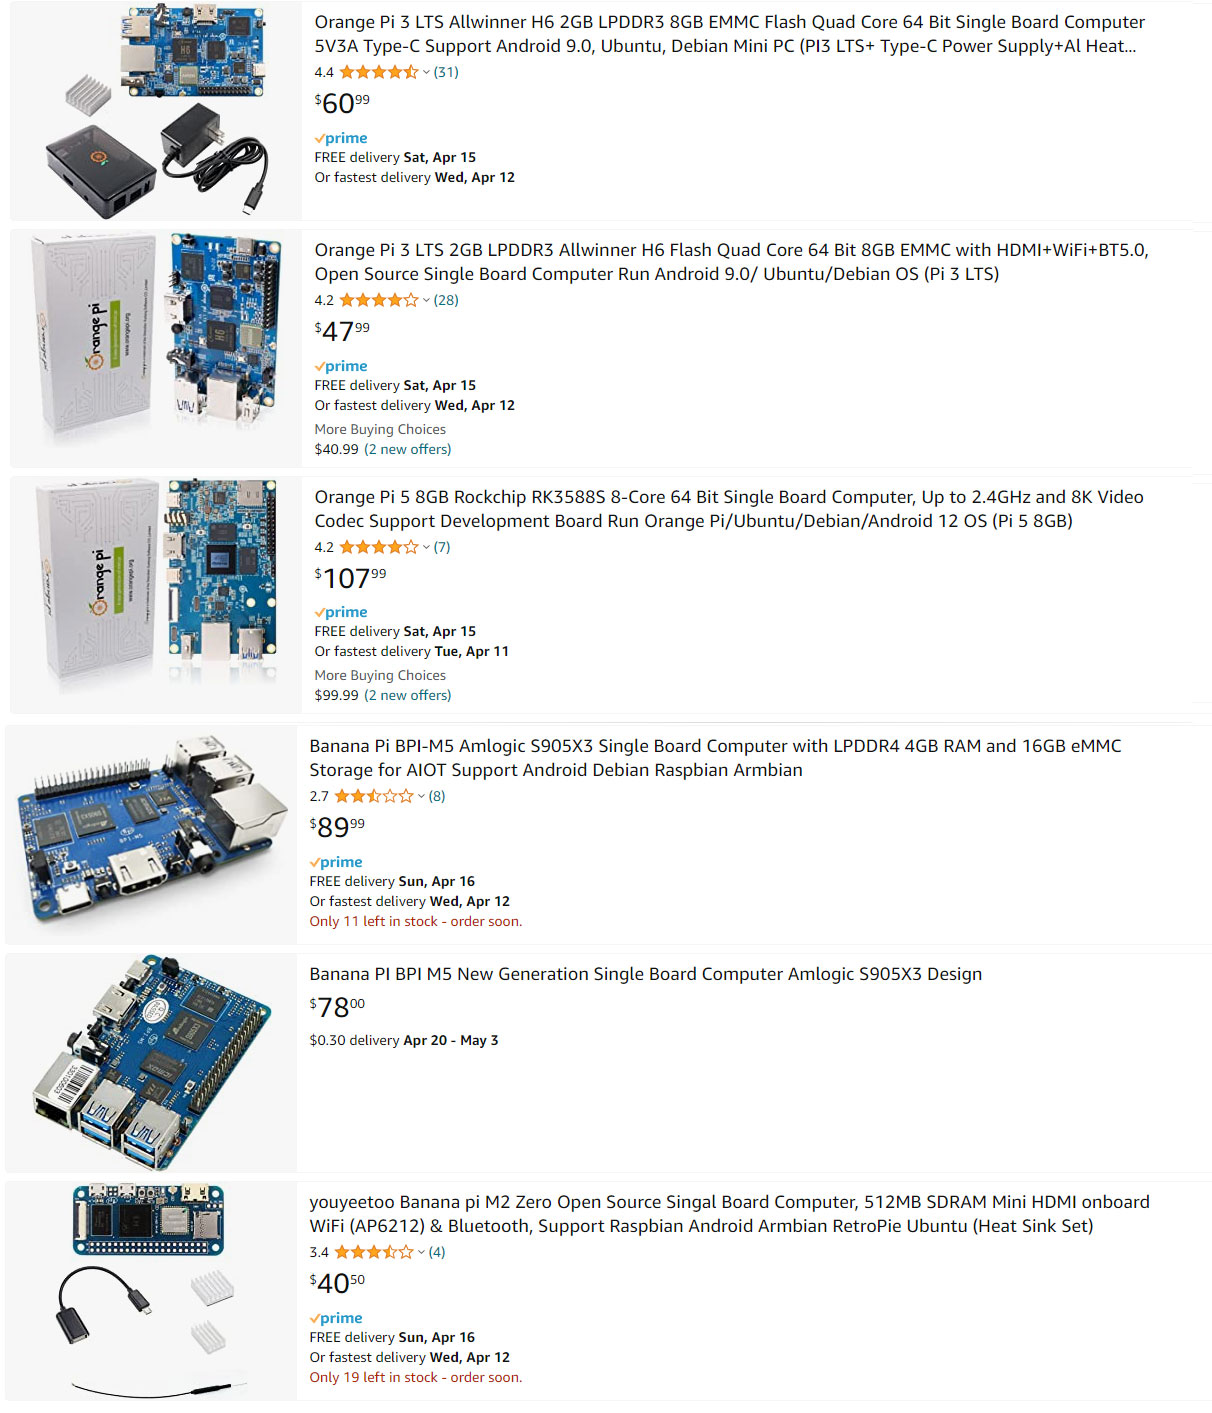 Other Pi prices from amazon.